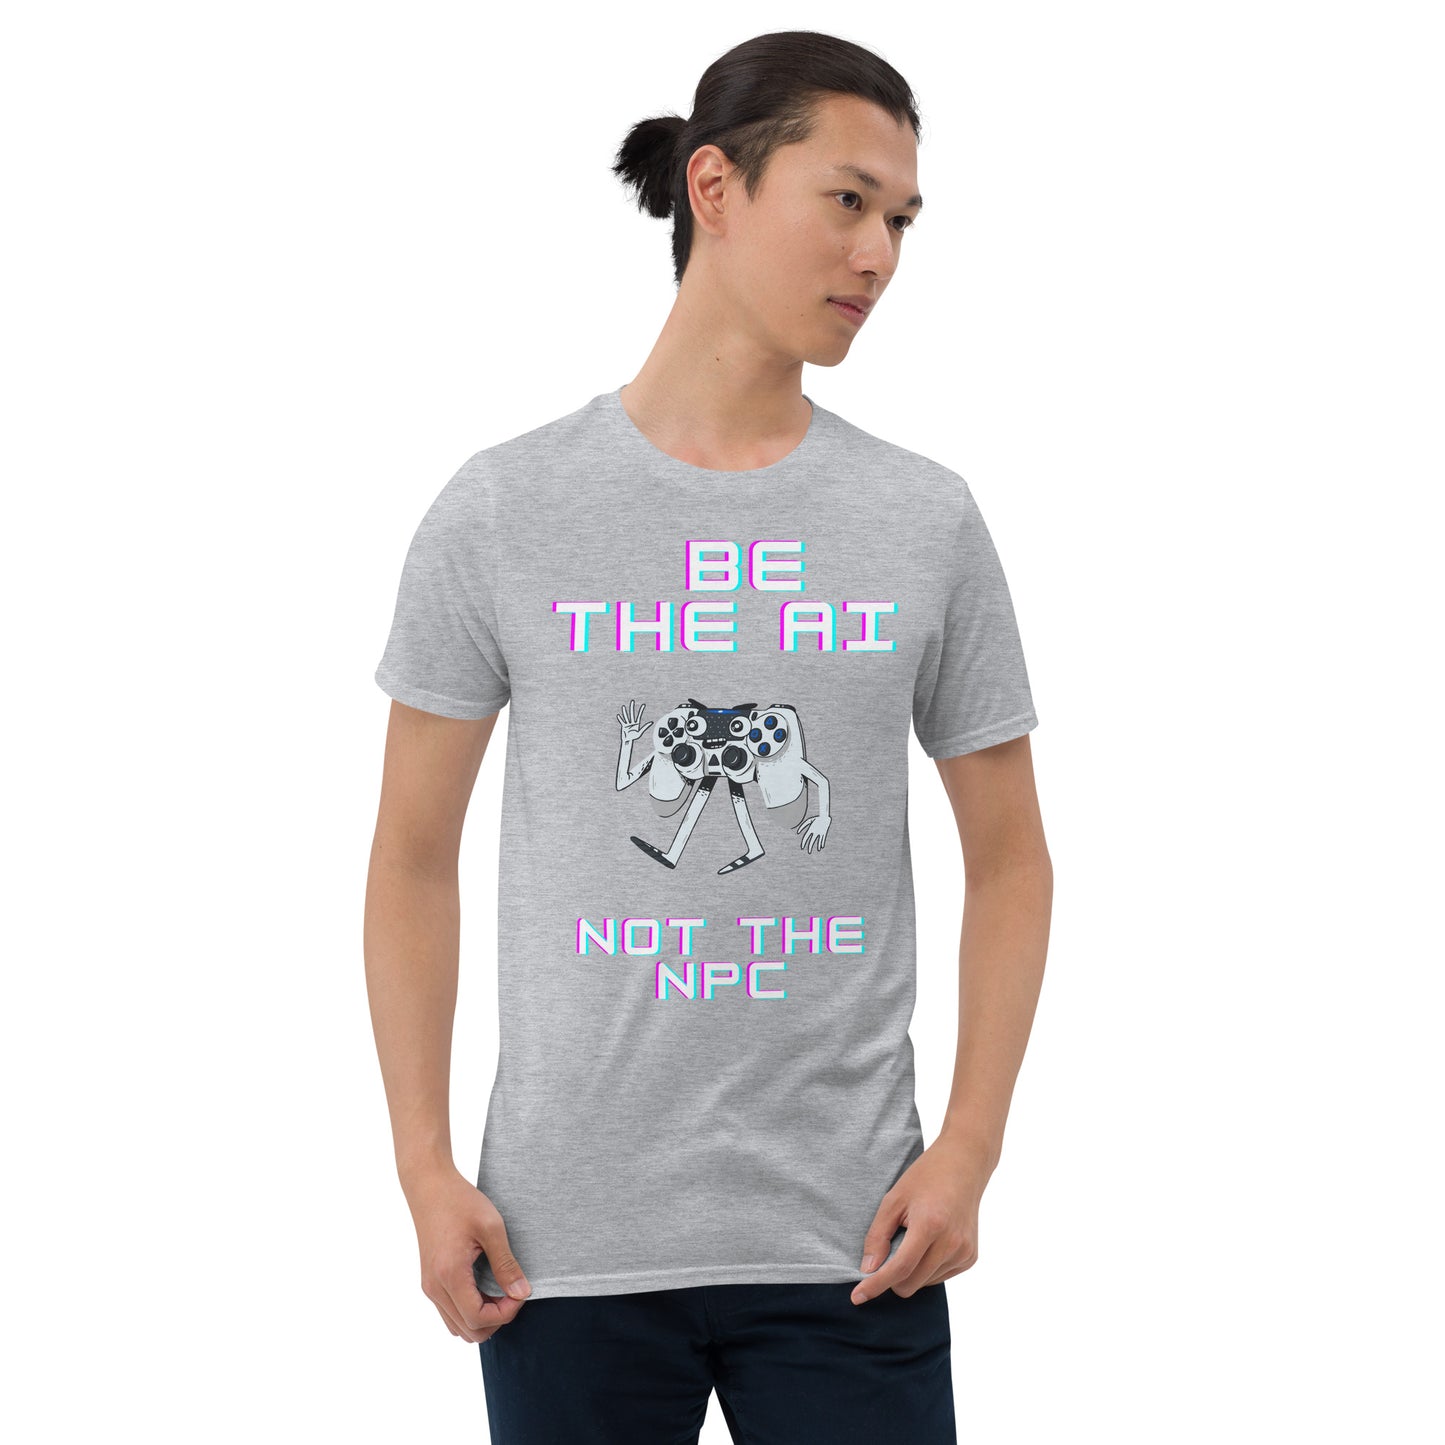 Man in sport grey short-sleeve t-shirt that says be the AI not the NPC